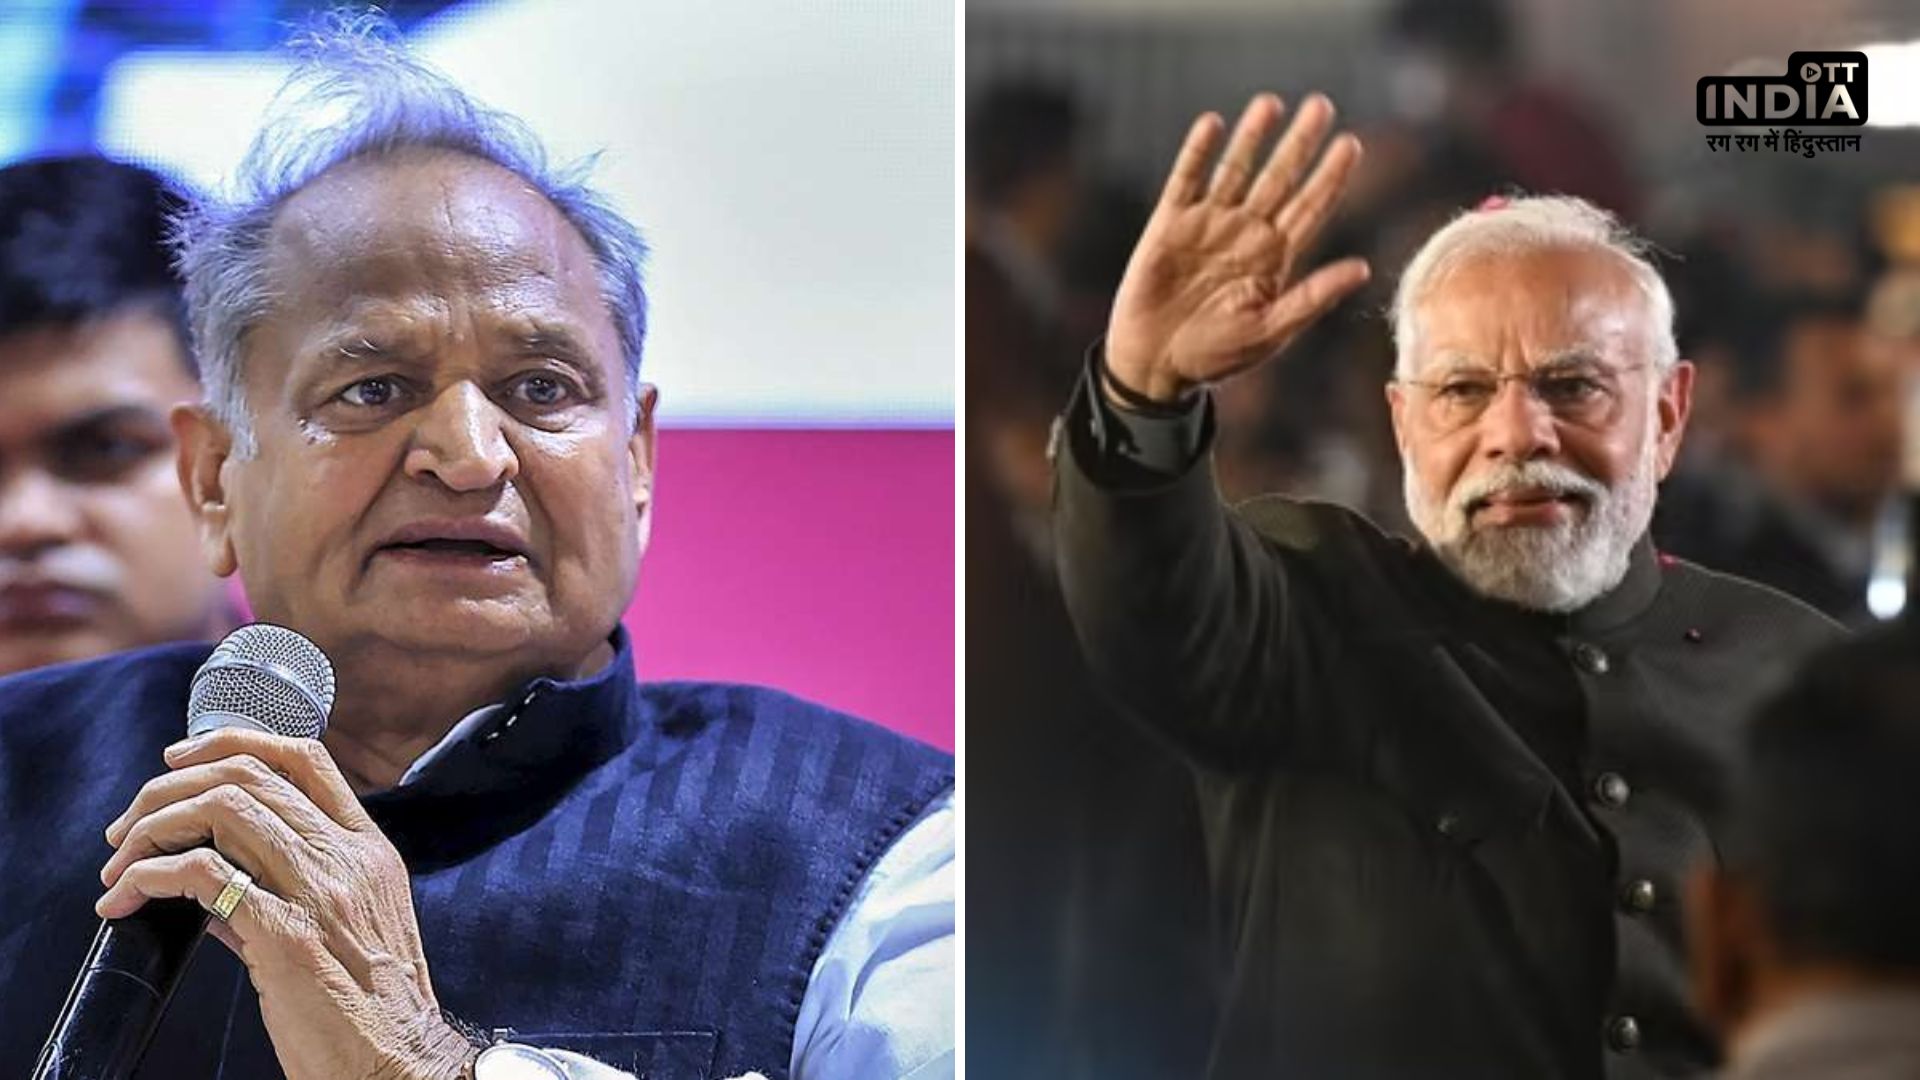 how Ashok singh Gehlot lost his CM Seat in Rajasthan Election Result